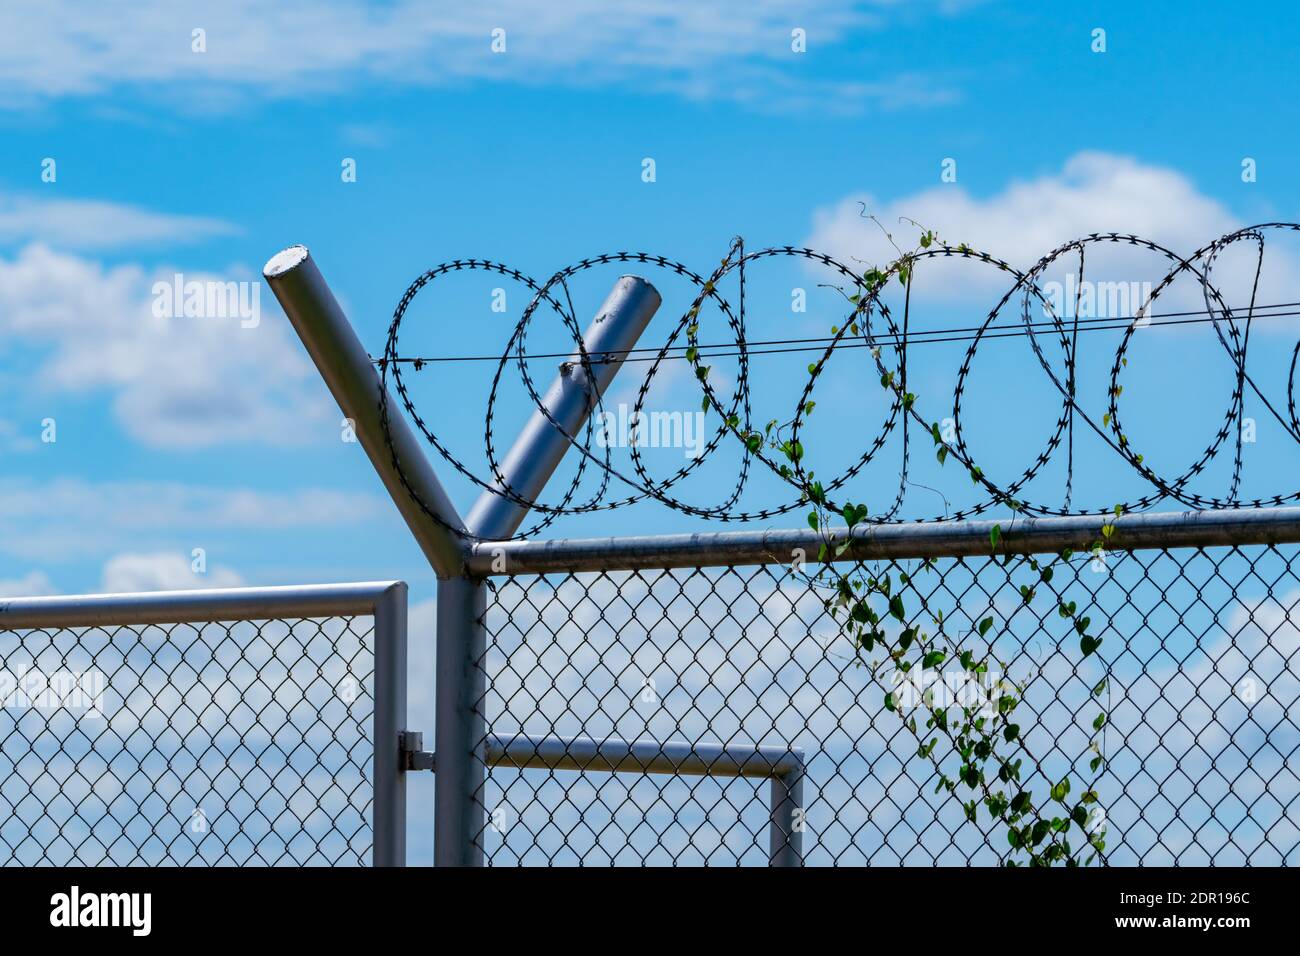 Prison Security Fence. Barbed Wire Security Fence. Razor Wire Jail Fence. Barrier Border. Boundary. Stock Photo